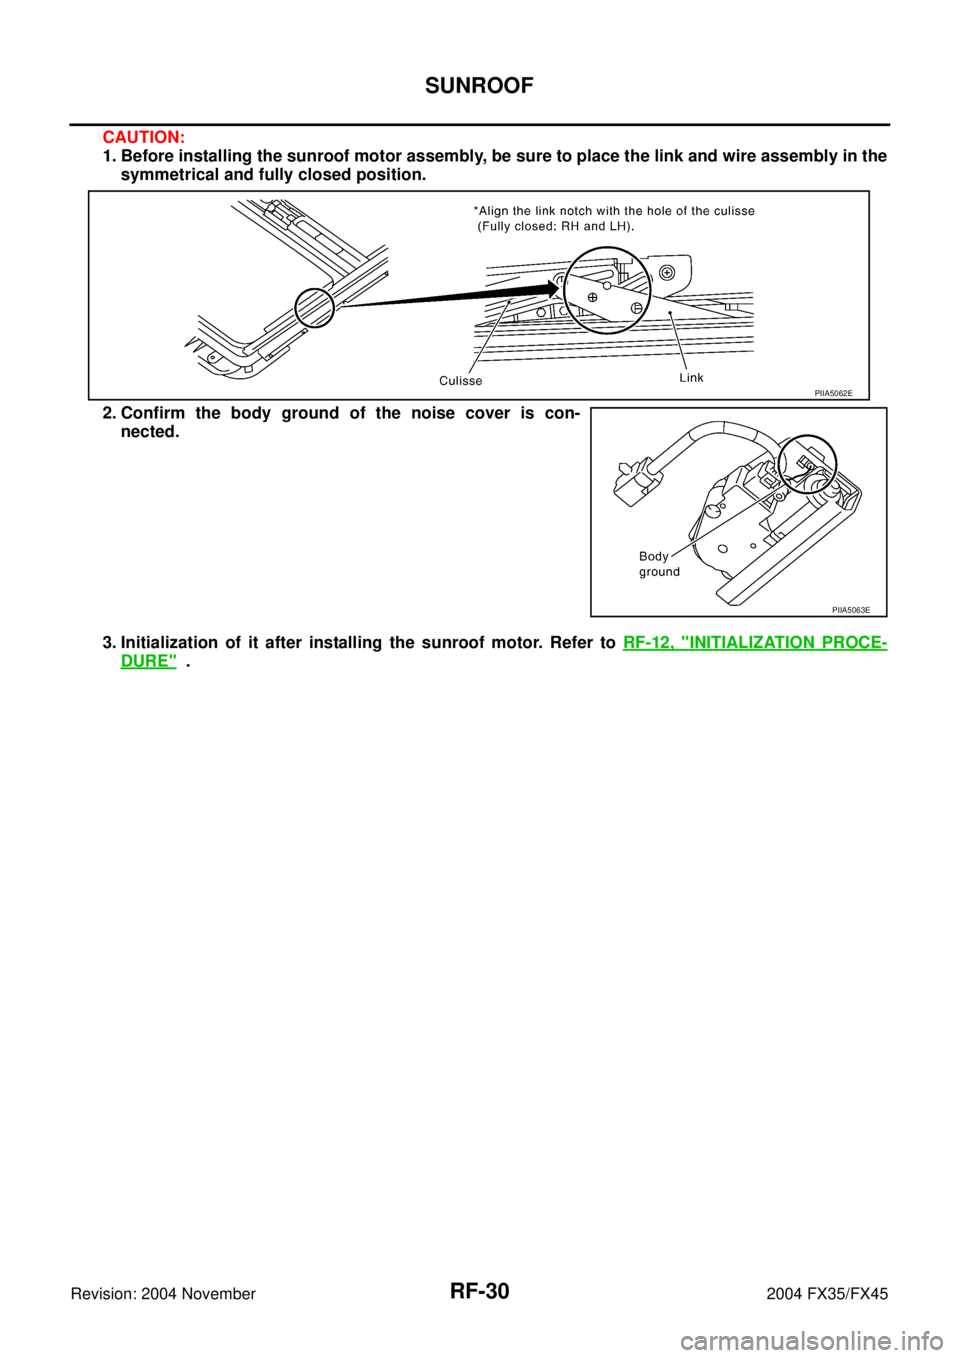 INFINITI FX35 2004  Service Manual RF-30
SUNROOF
Revision: 2004 November 2004 FX35/FX45
CAUTION:
1. Before installing the sunroof motor assembly, be sure to place the link and wire assembly in the
symmetrical and fully closed position.